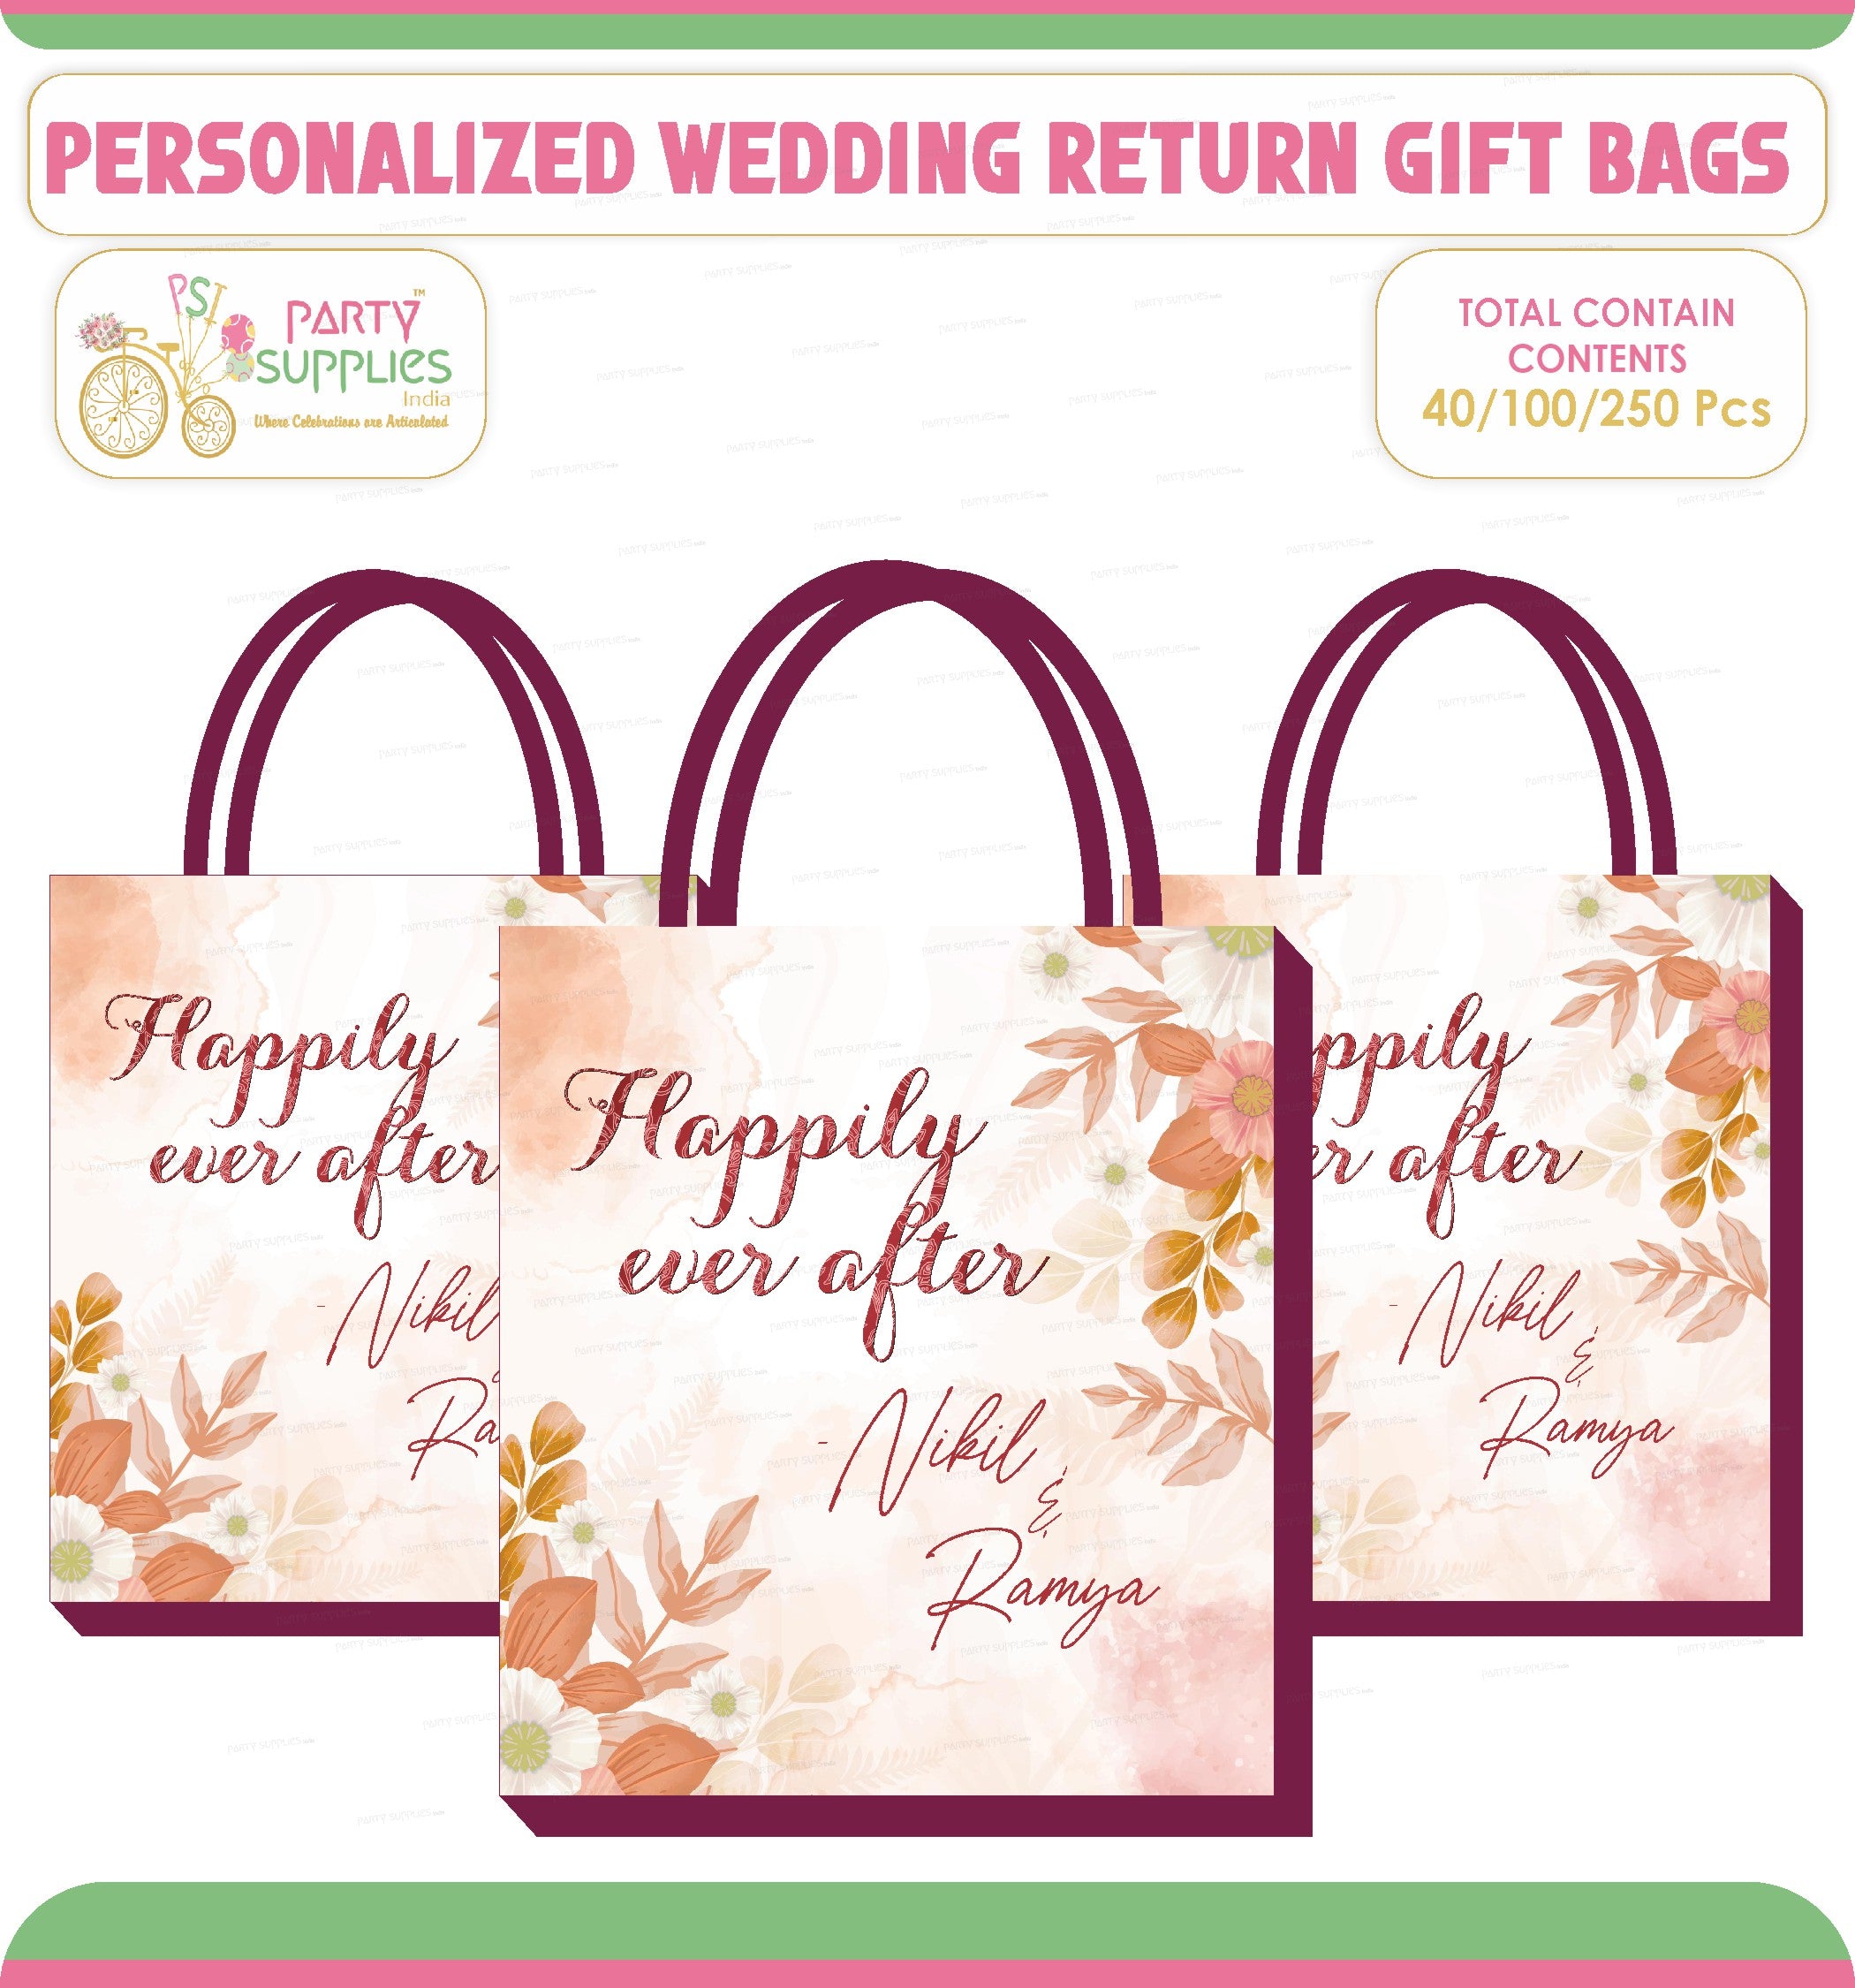 Marriage Return Gifts - Thamboolam in a useful and reusable bag. Happy  customer happy we ! Customizable.. Call @ 9940024372 Watsapp @ 9944099666  #marriagereturngifts #returngifts #weddingfavors #weddingreturngifts  #thamboolambags #thamboolam #giftbags ...